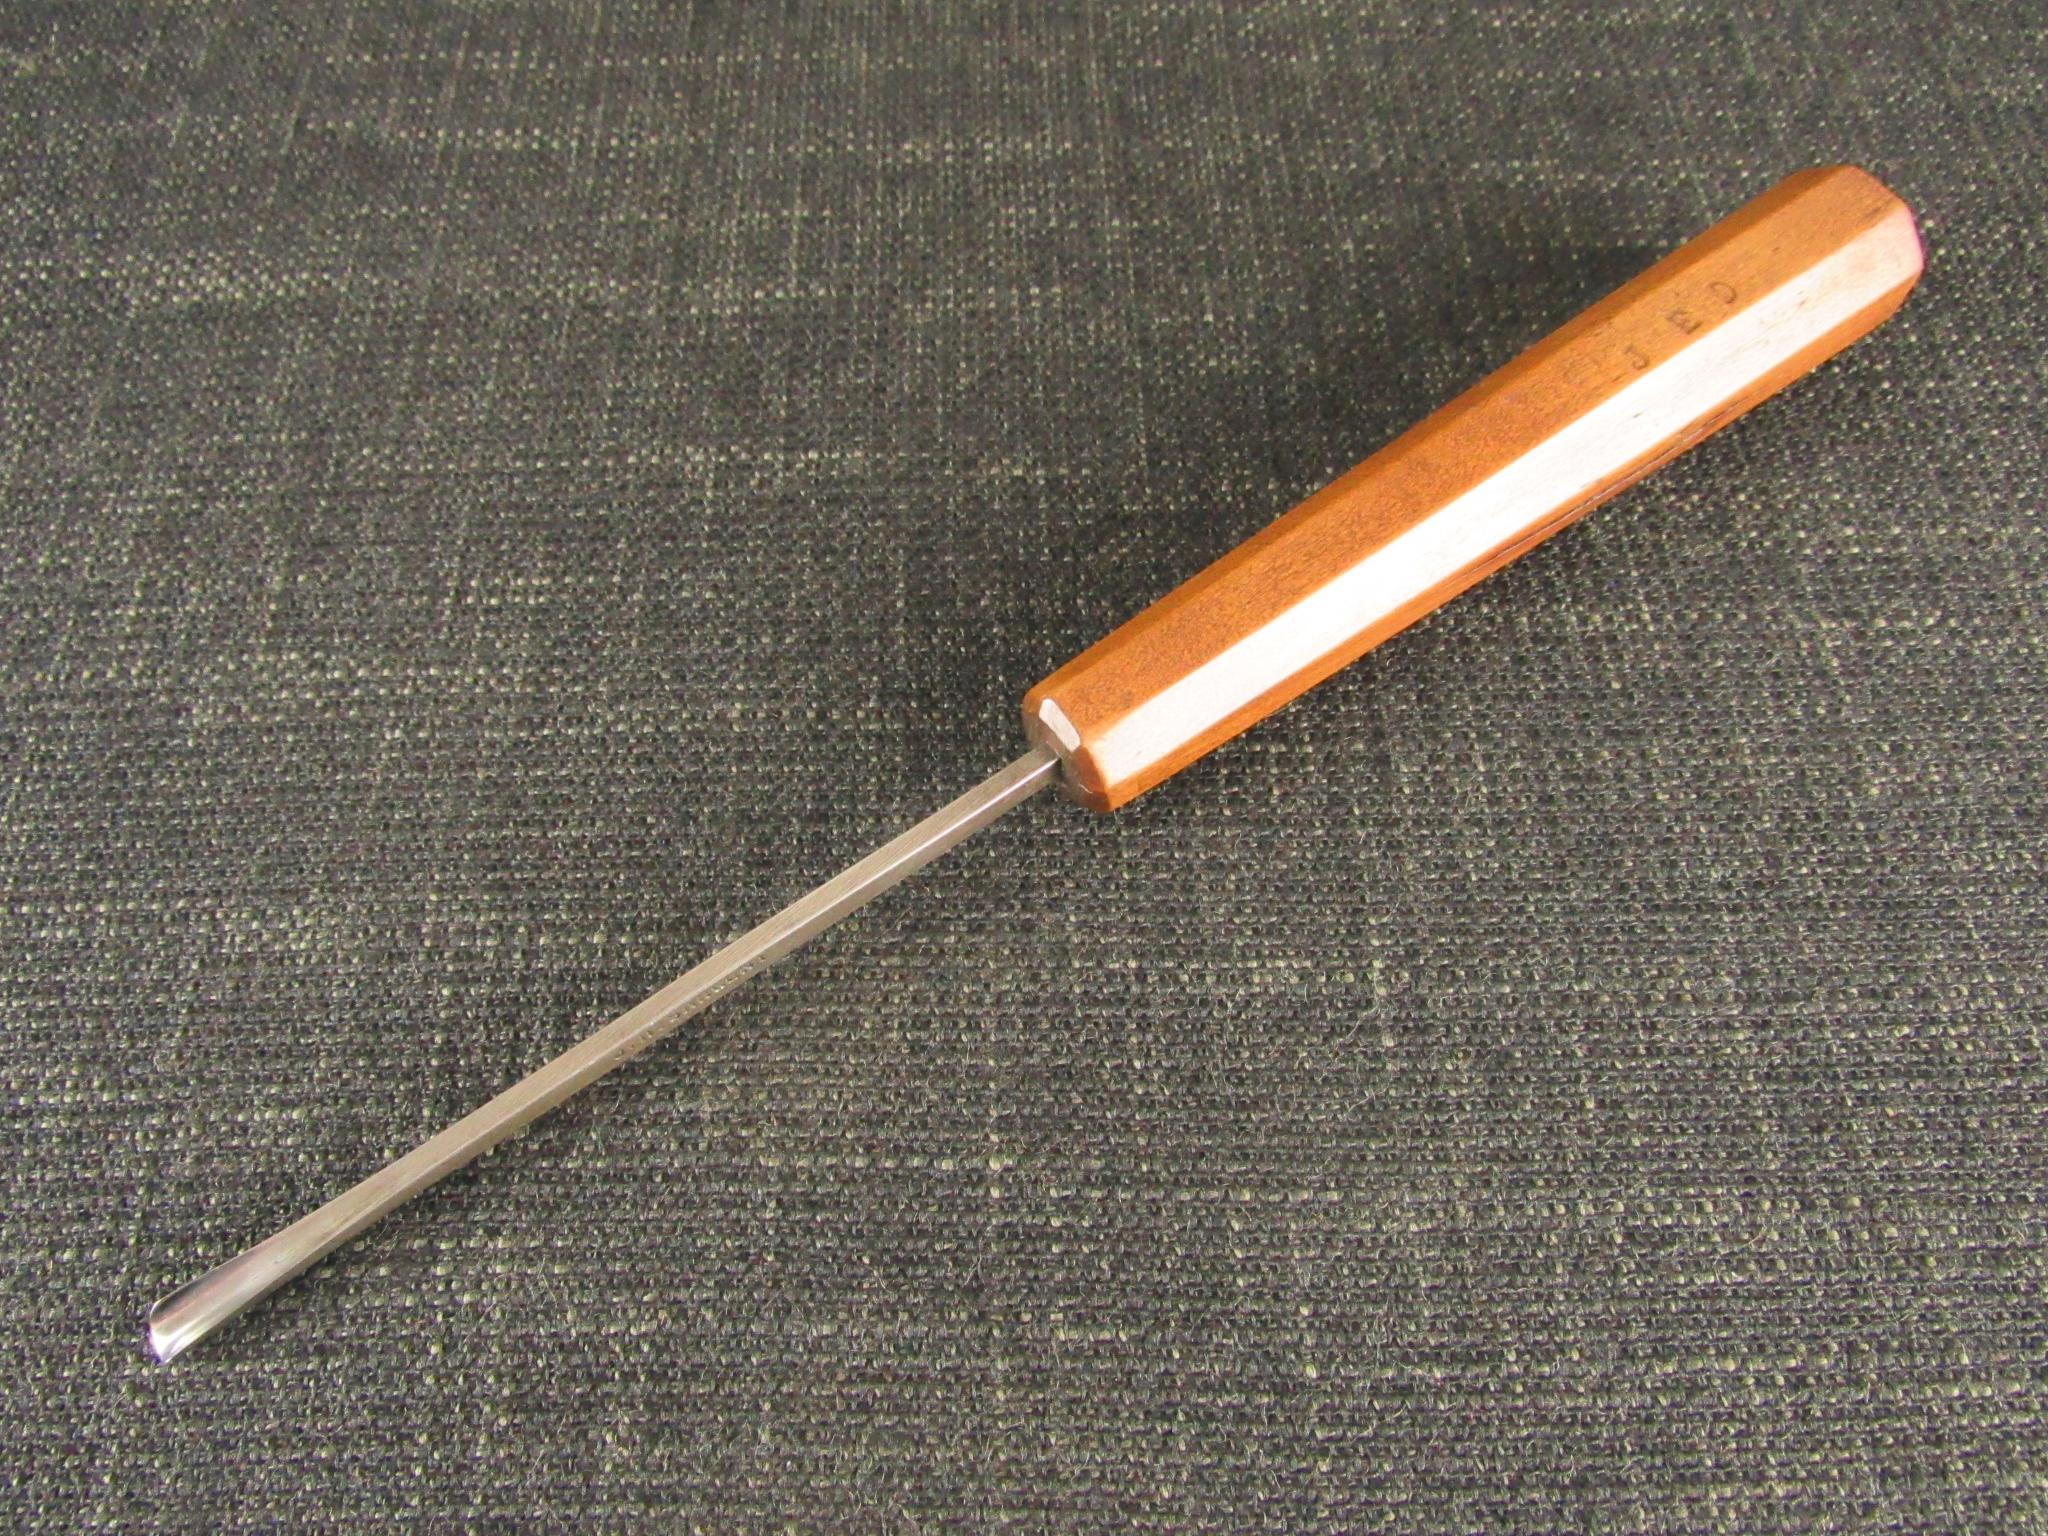 JH SARGENT Fishtail Carving Gouge - 1/4 inch